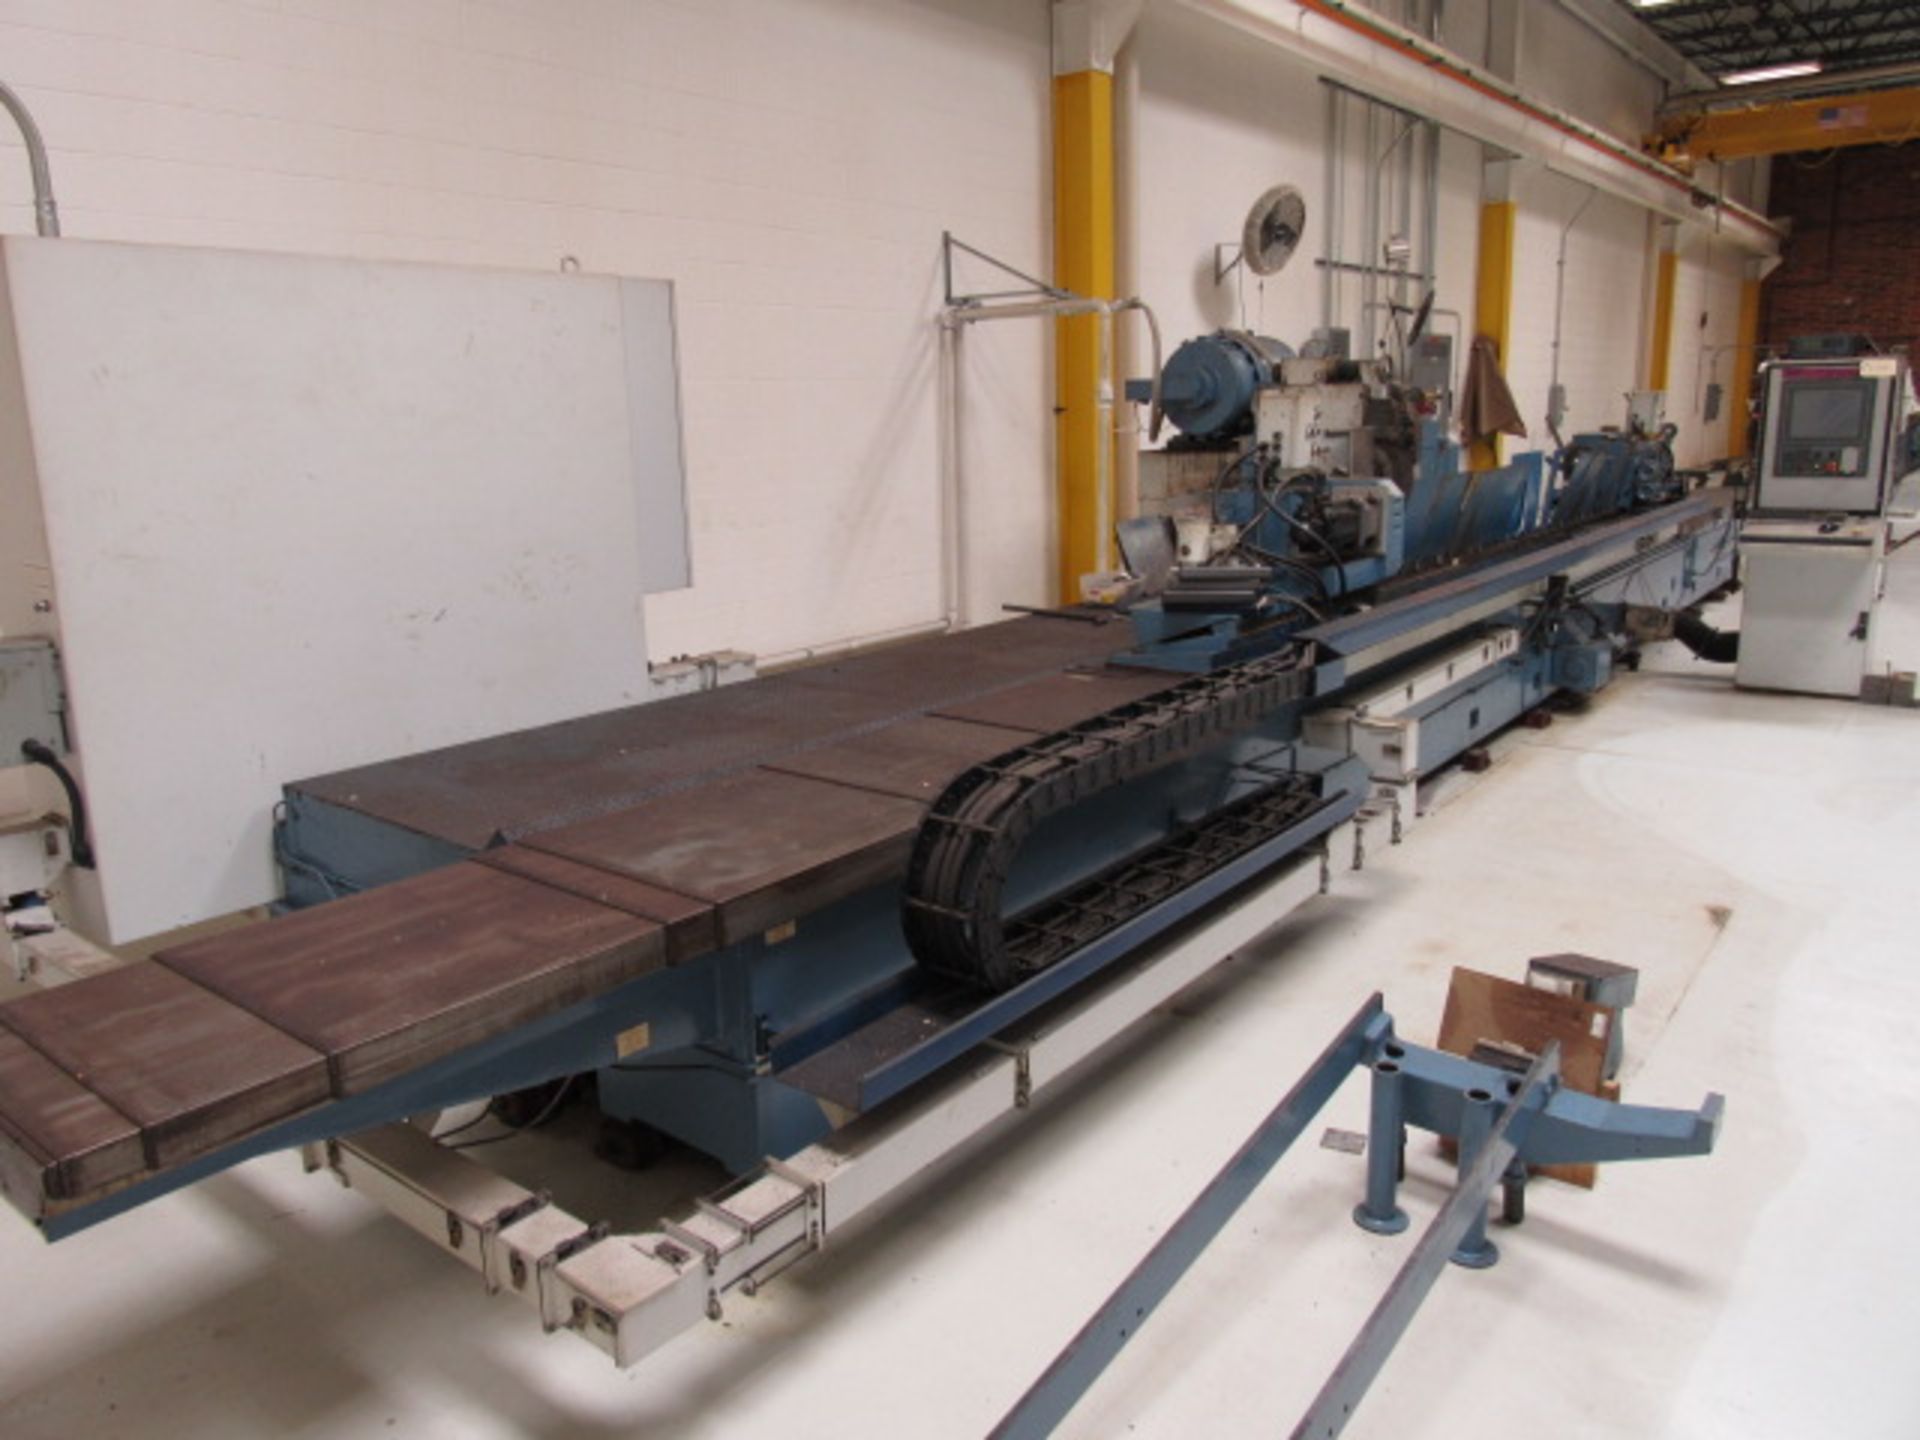 Naxos-Union RTLDQY CNC-S 26'' x Approx 156'' CNC Cylindrical/Roll Grinder - Image 5 of 12